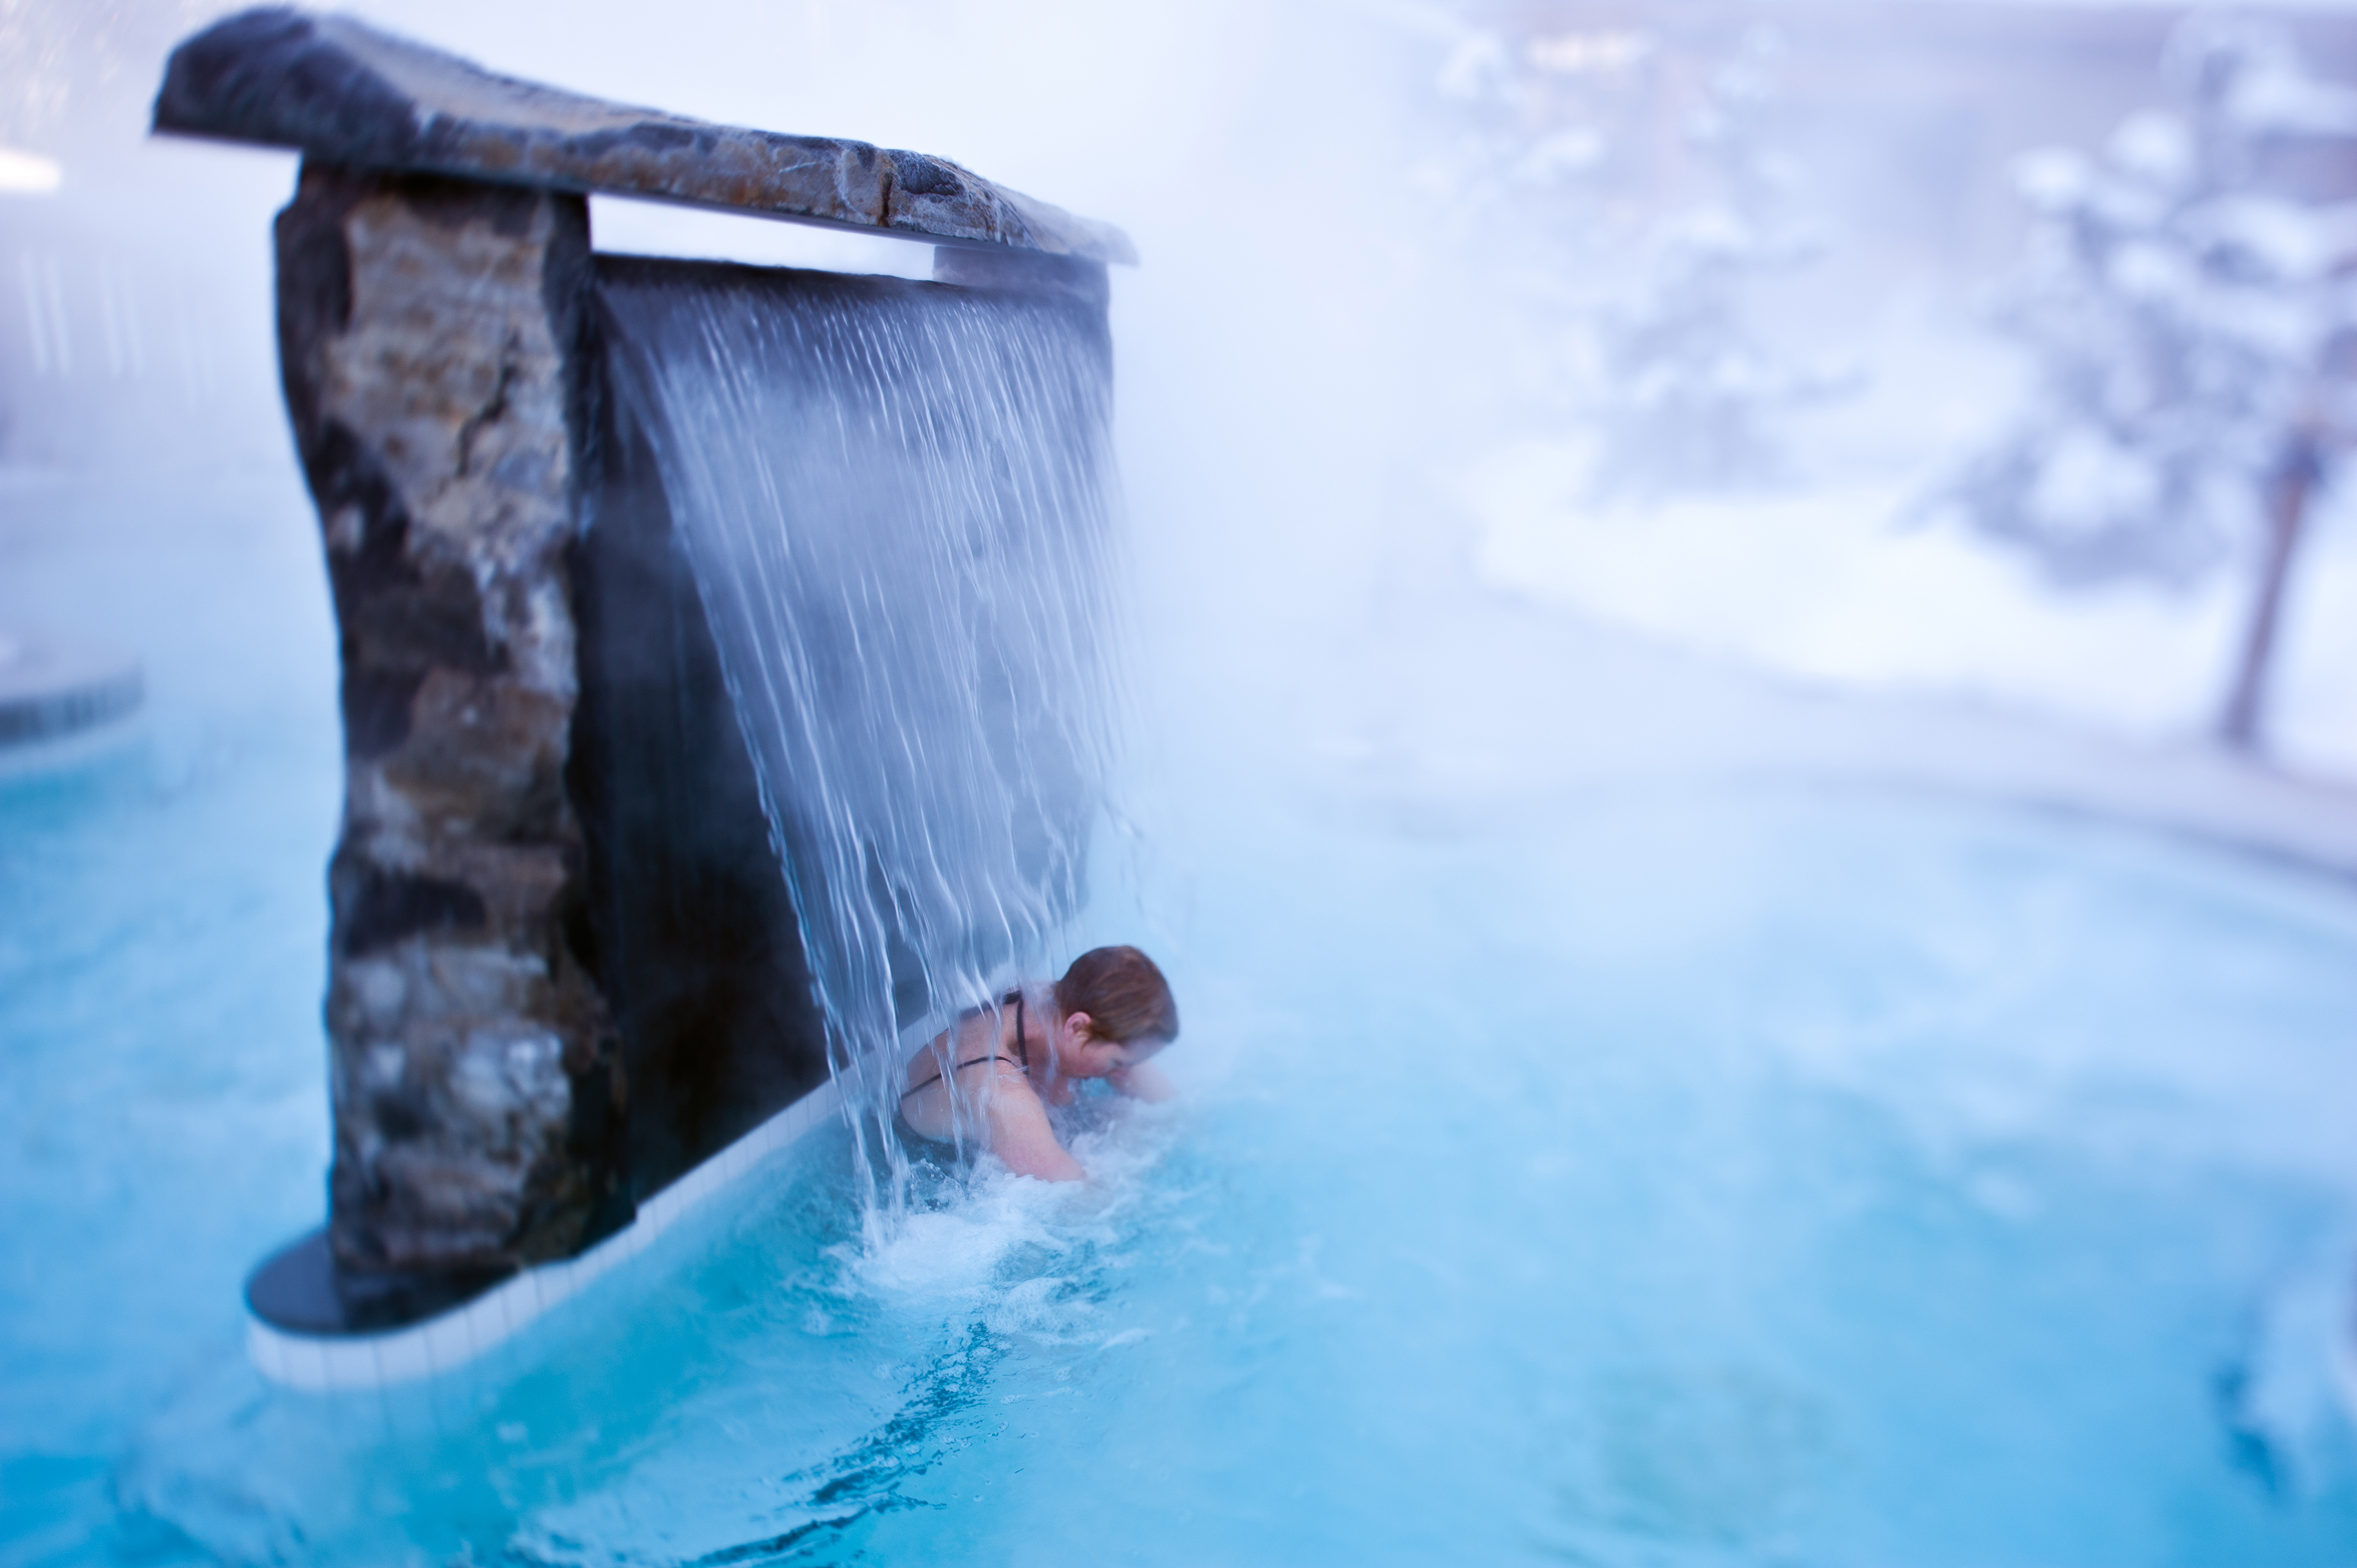 Whistler Skiing Vacations: The Scandinave Spa Whistler